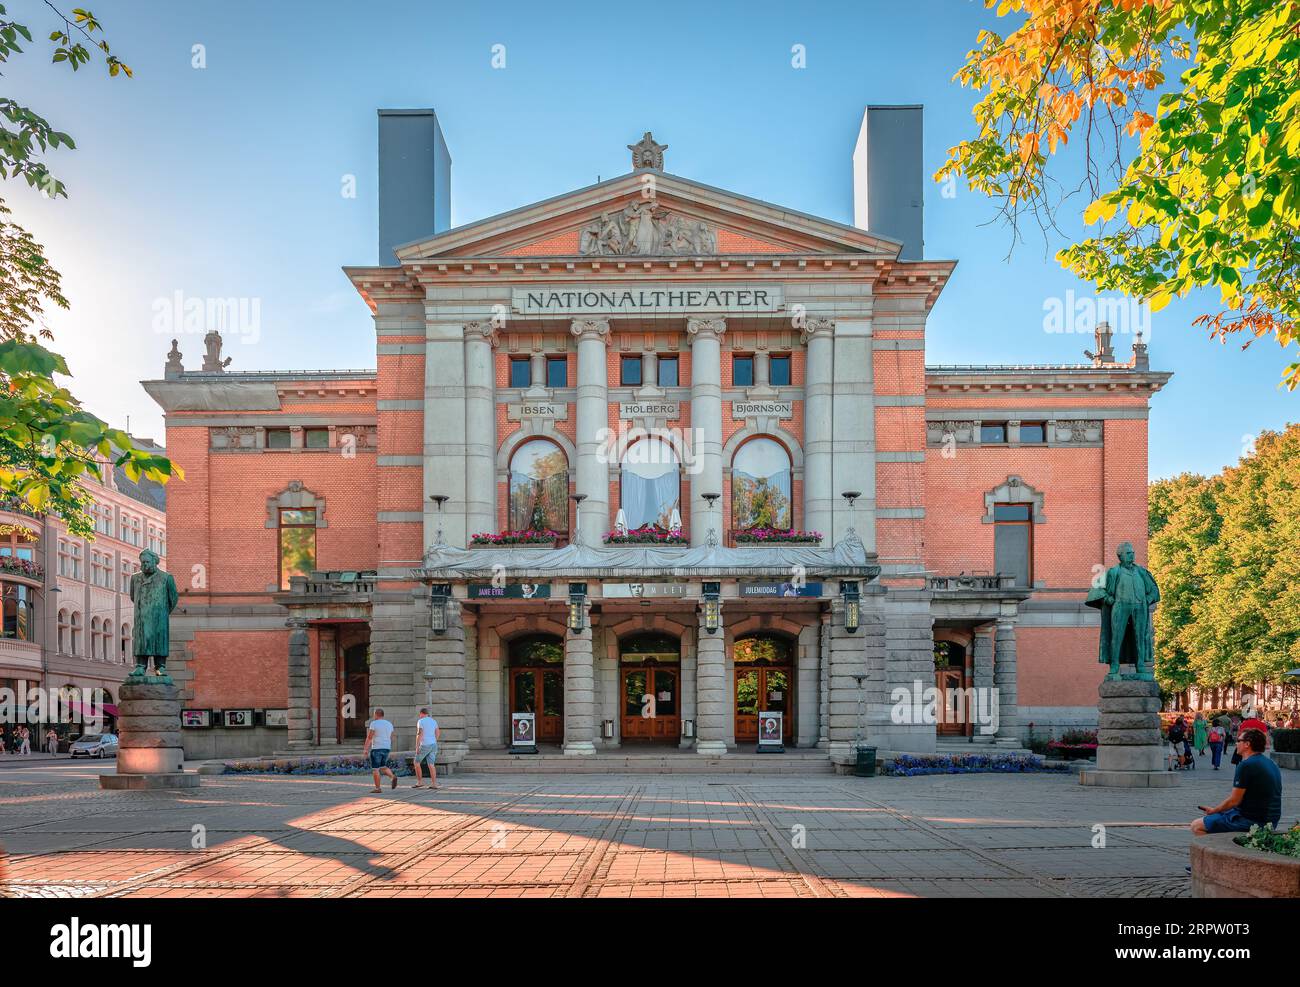 The National Theatre in Olso. Inaugurated in 1899, it is one of Norway's largest and most prominent venues for performance of dramatic arts. Stock Photo